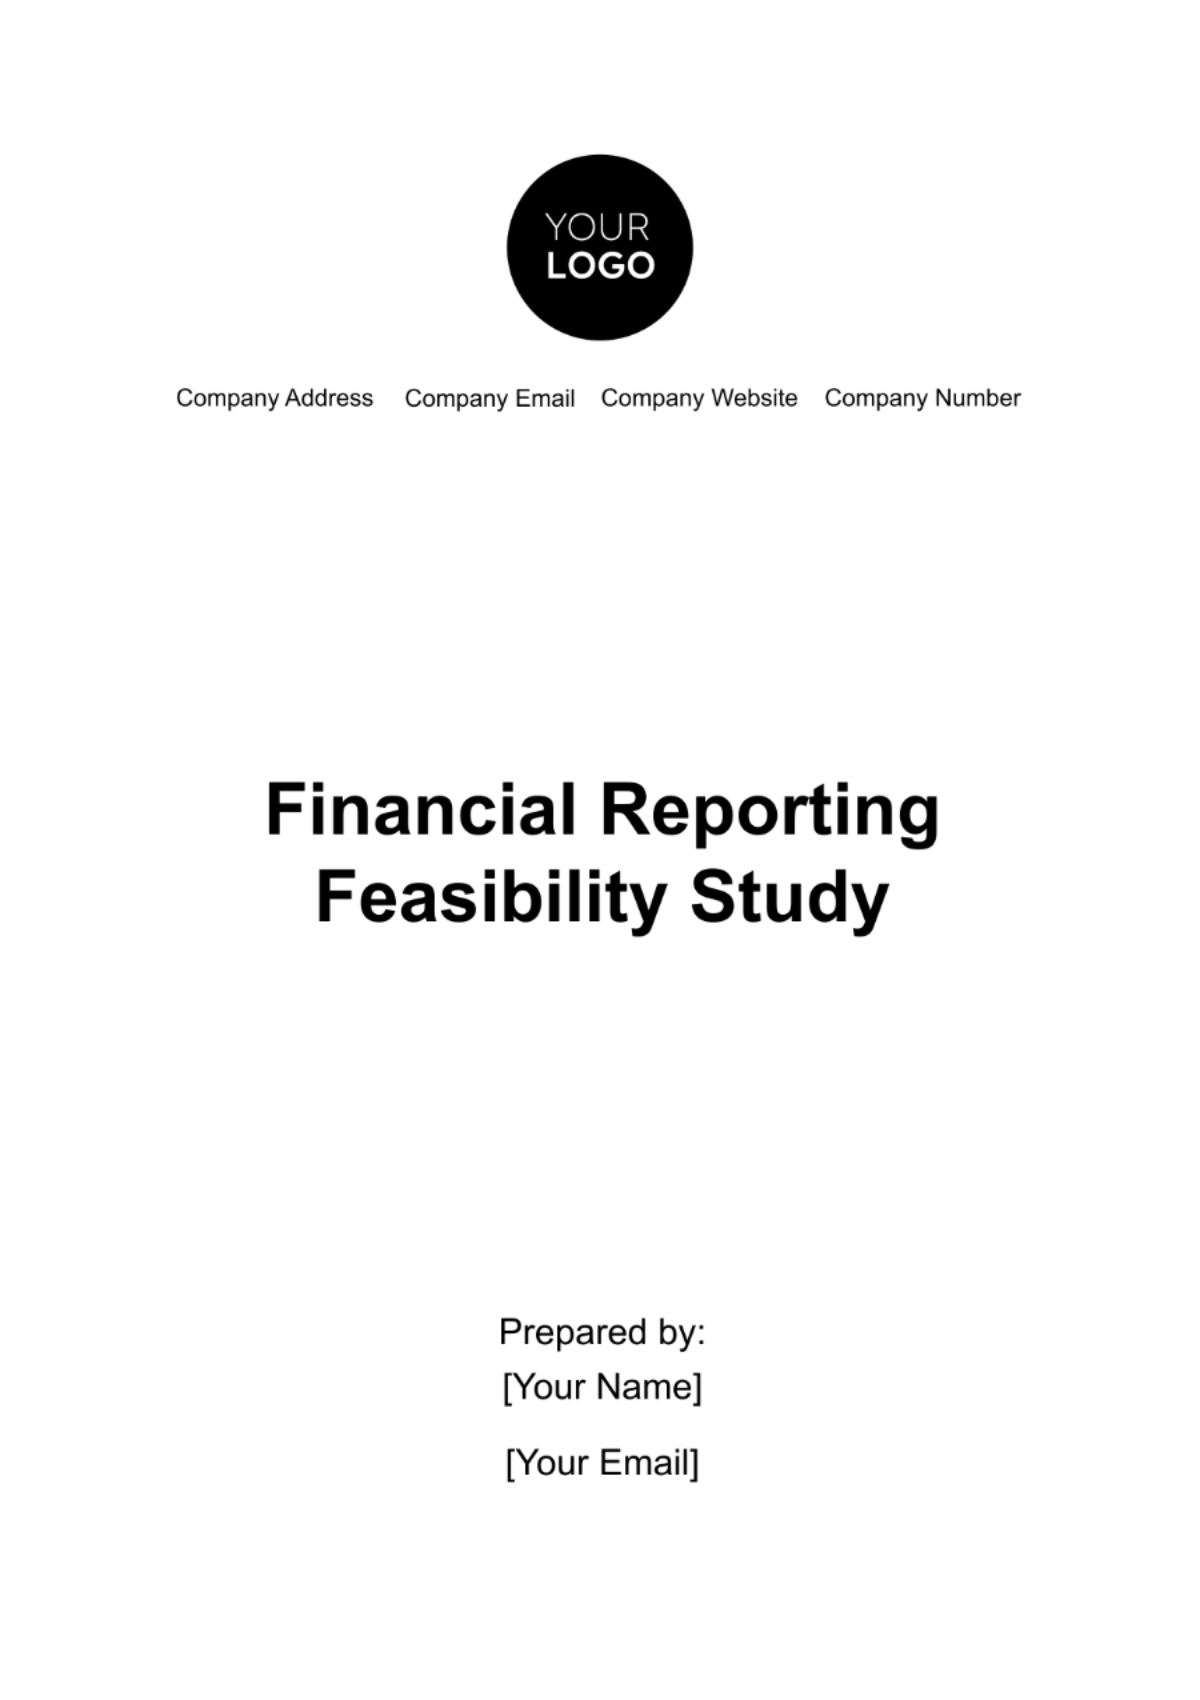 Financial Reporting Feasibility Study Template